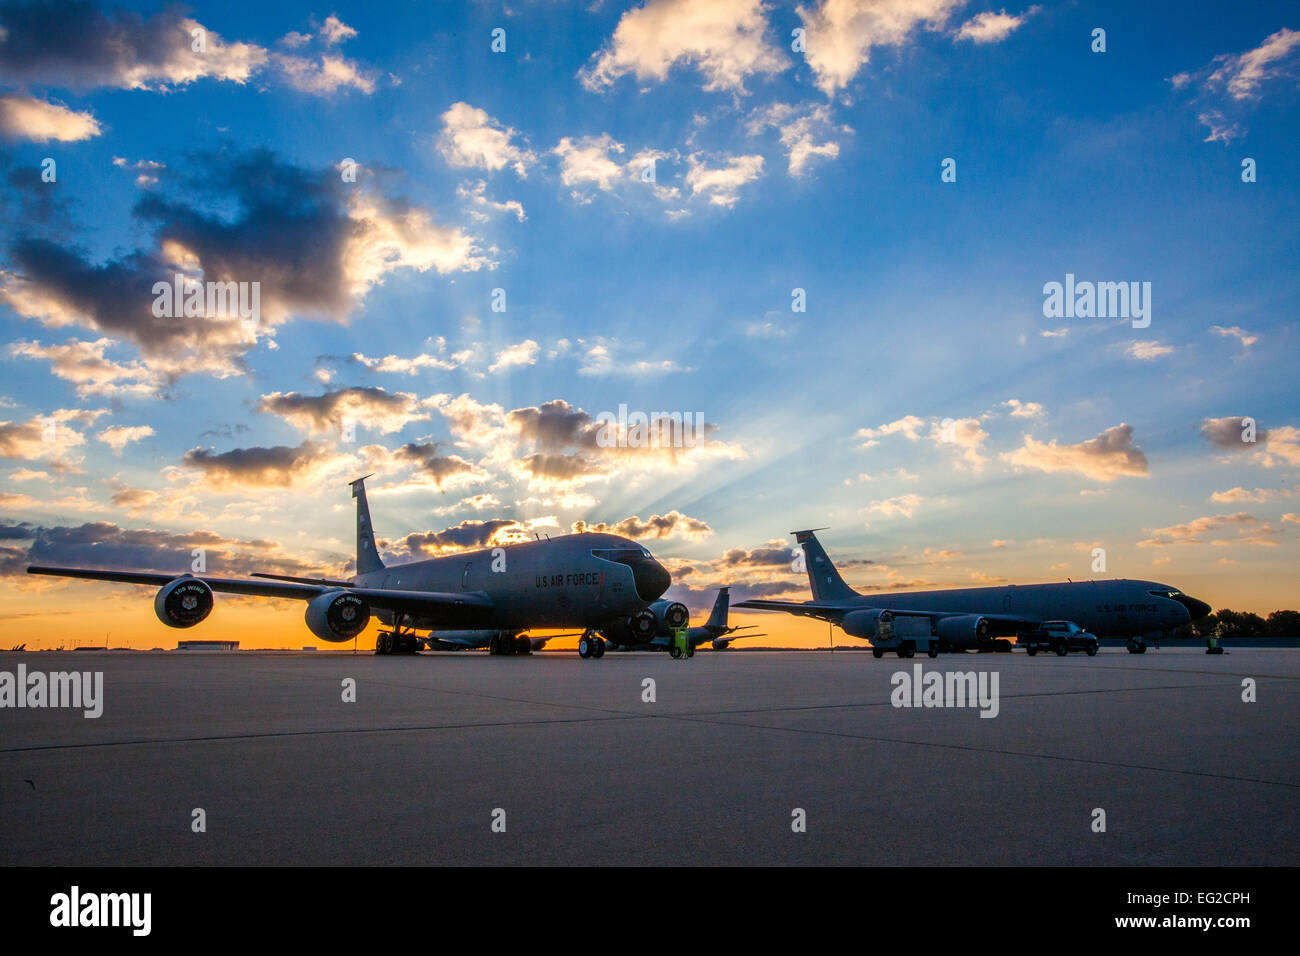 The sun rises above KC-135R Stratotankers on the New Jersey Air National Guard flightline at Joint Base McGuire-Dix-Lakehurst, N.J., Sept. 26, 2014. The KC-135Rs are assigned to the 108th Wing.  Master Sgt. Mark C. Olsen Stock Photo